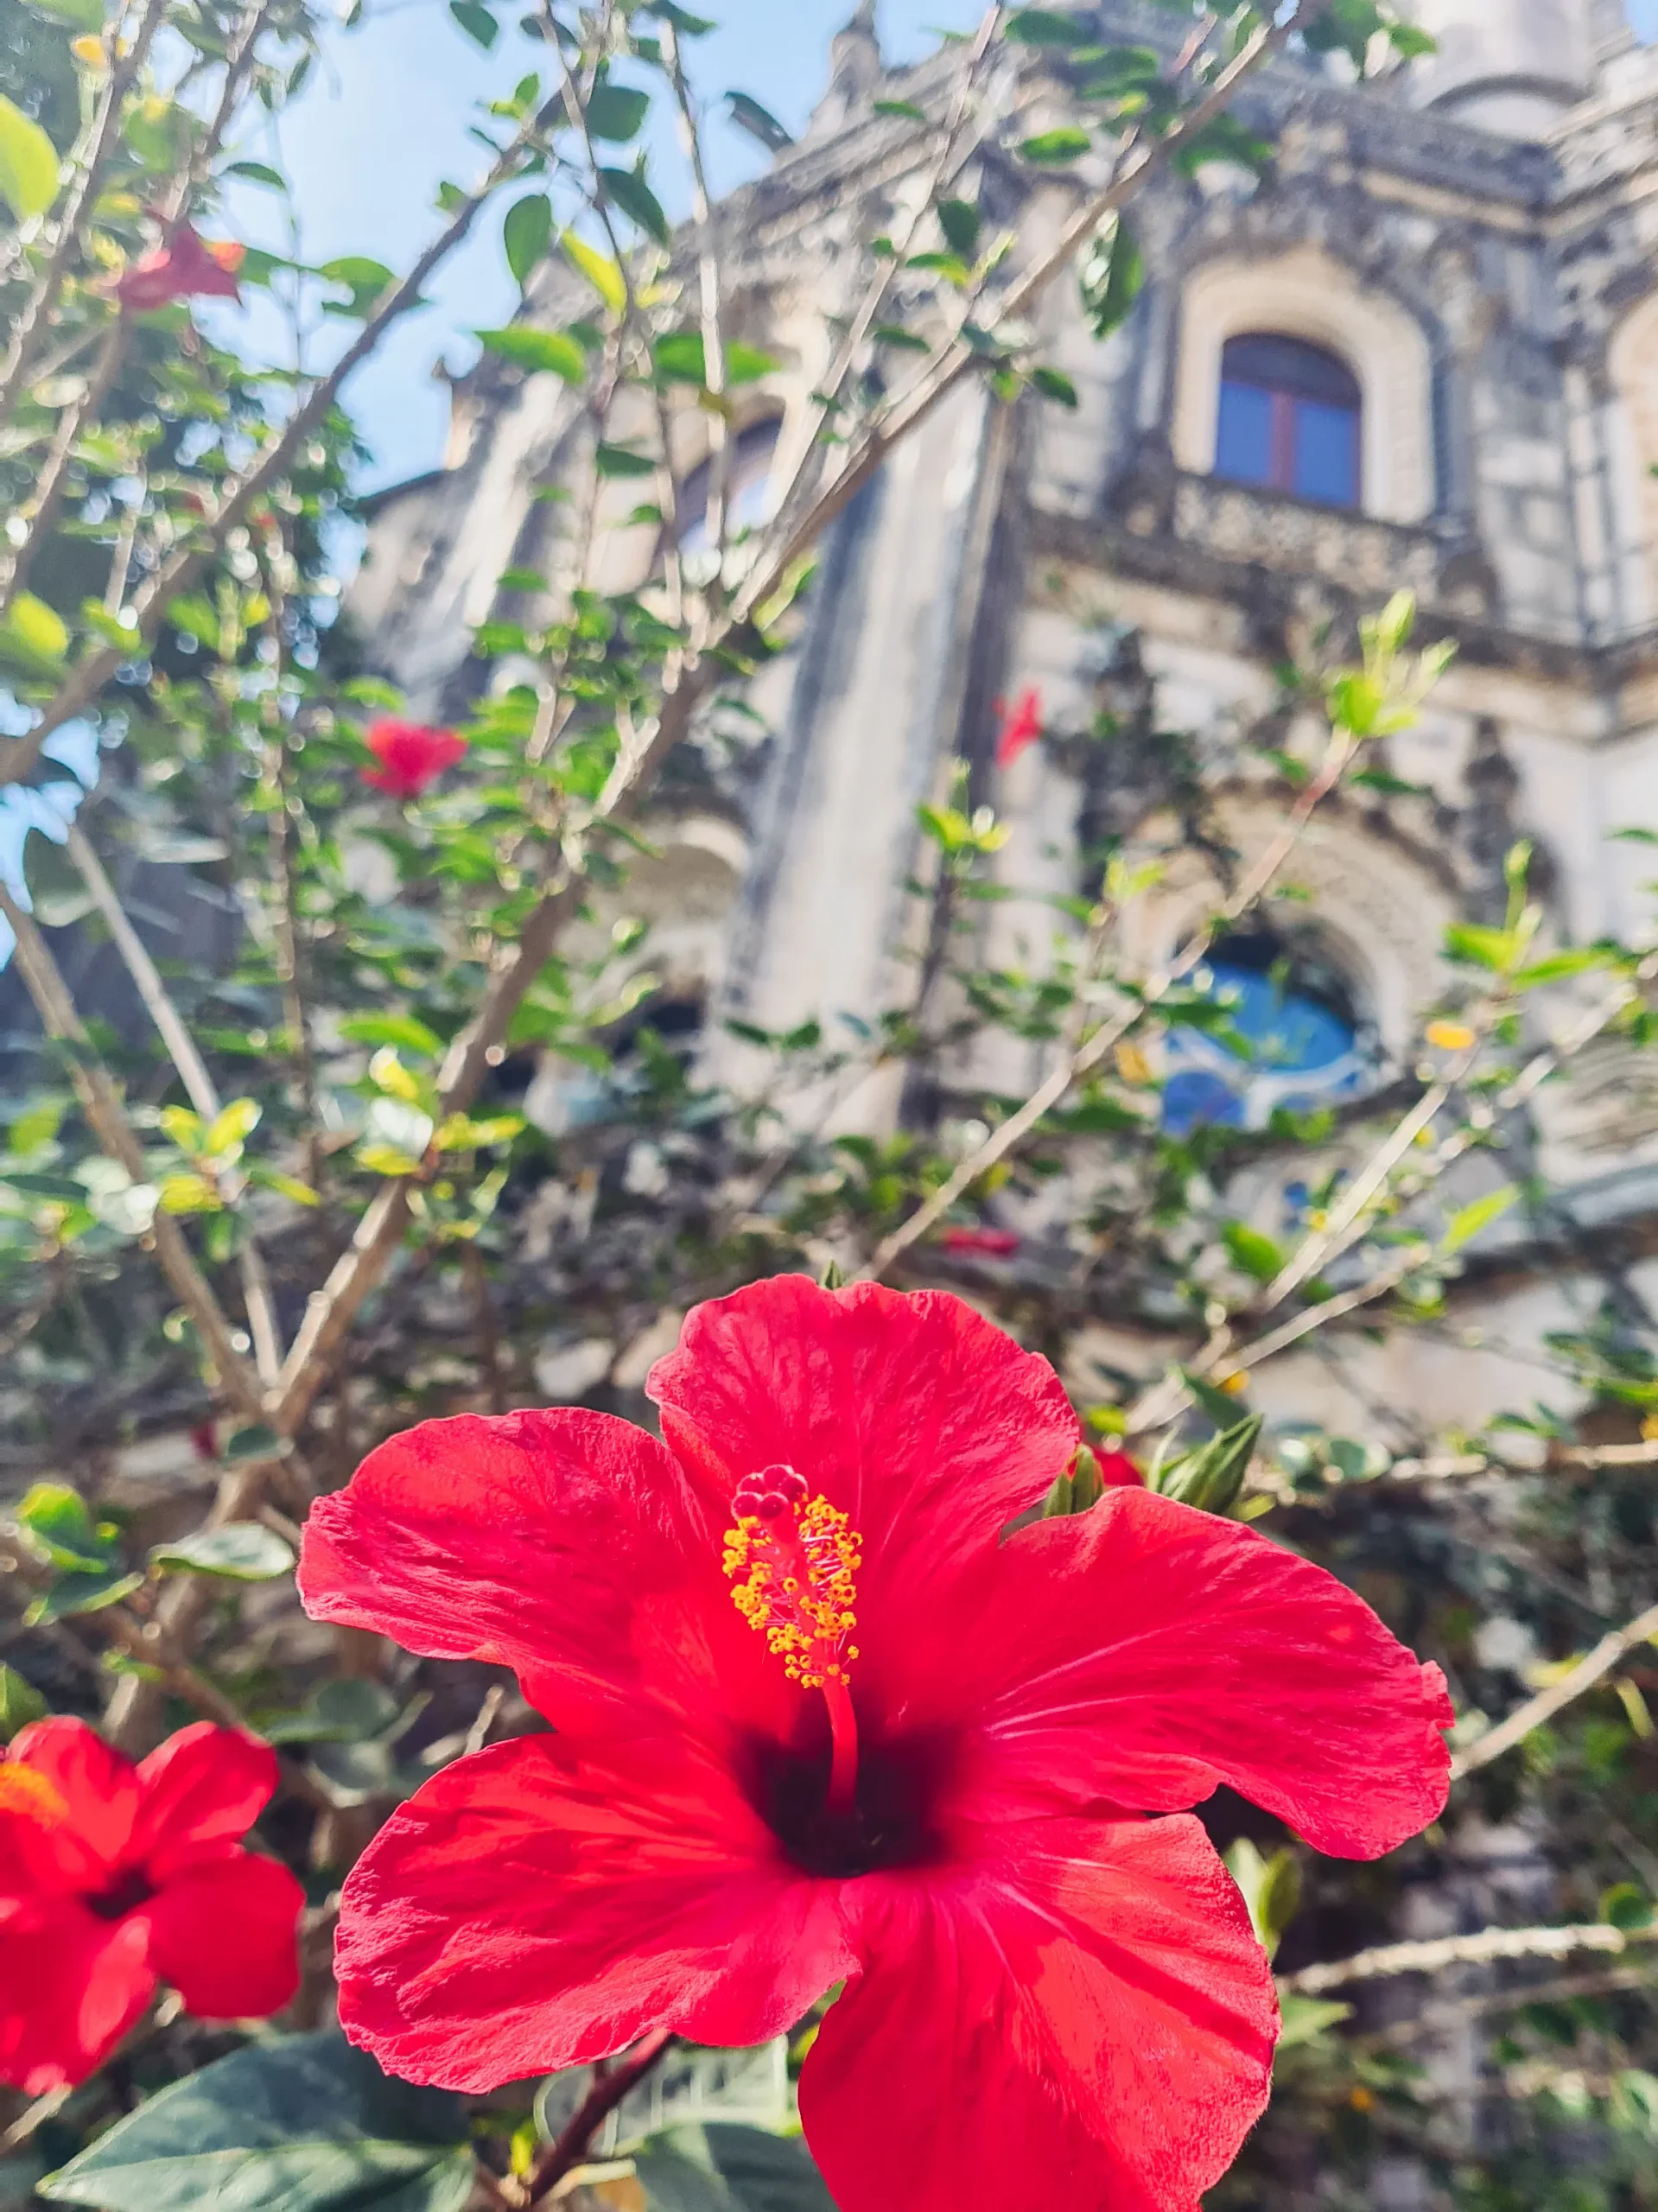 Close up of red Hibiscus flower in from of the ornate stone Quinta da Regaleira palace in Sintra.